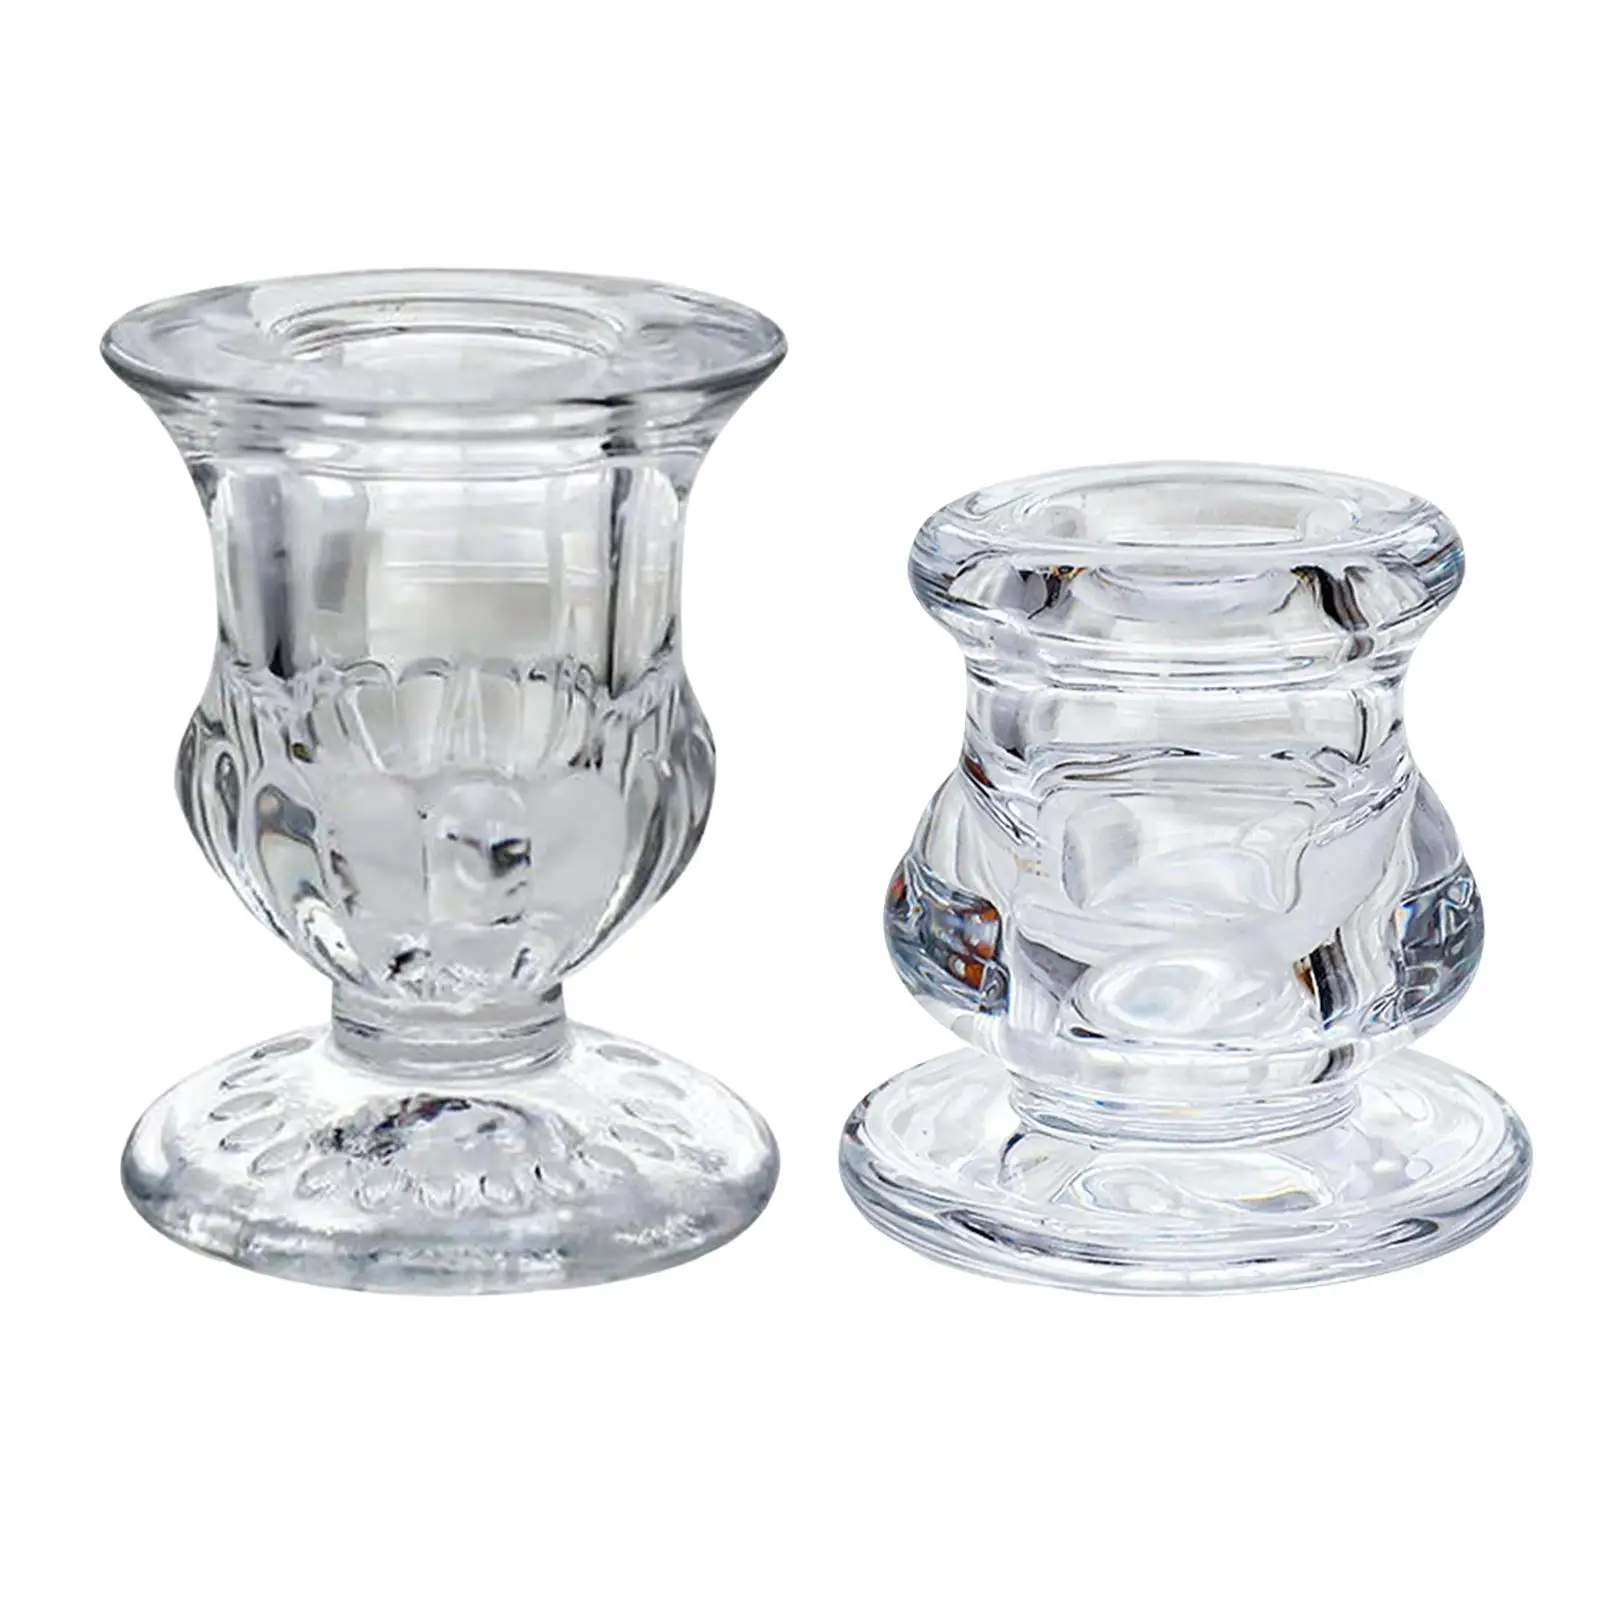 Glass Candleholder Wedding Stand Decoration Event Party Home Pillar Candle